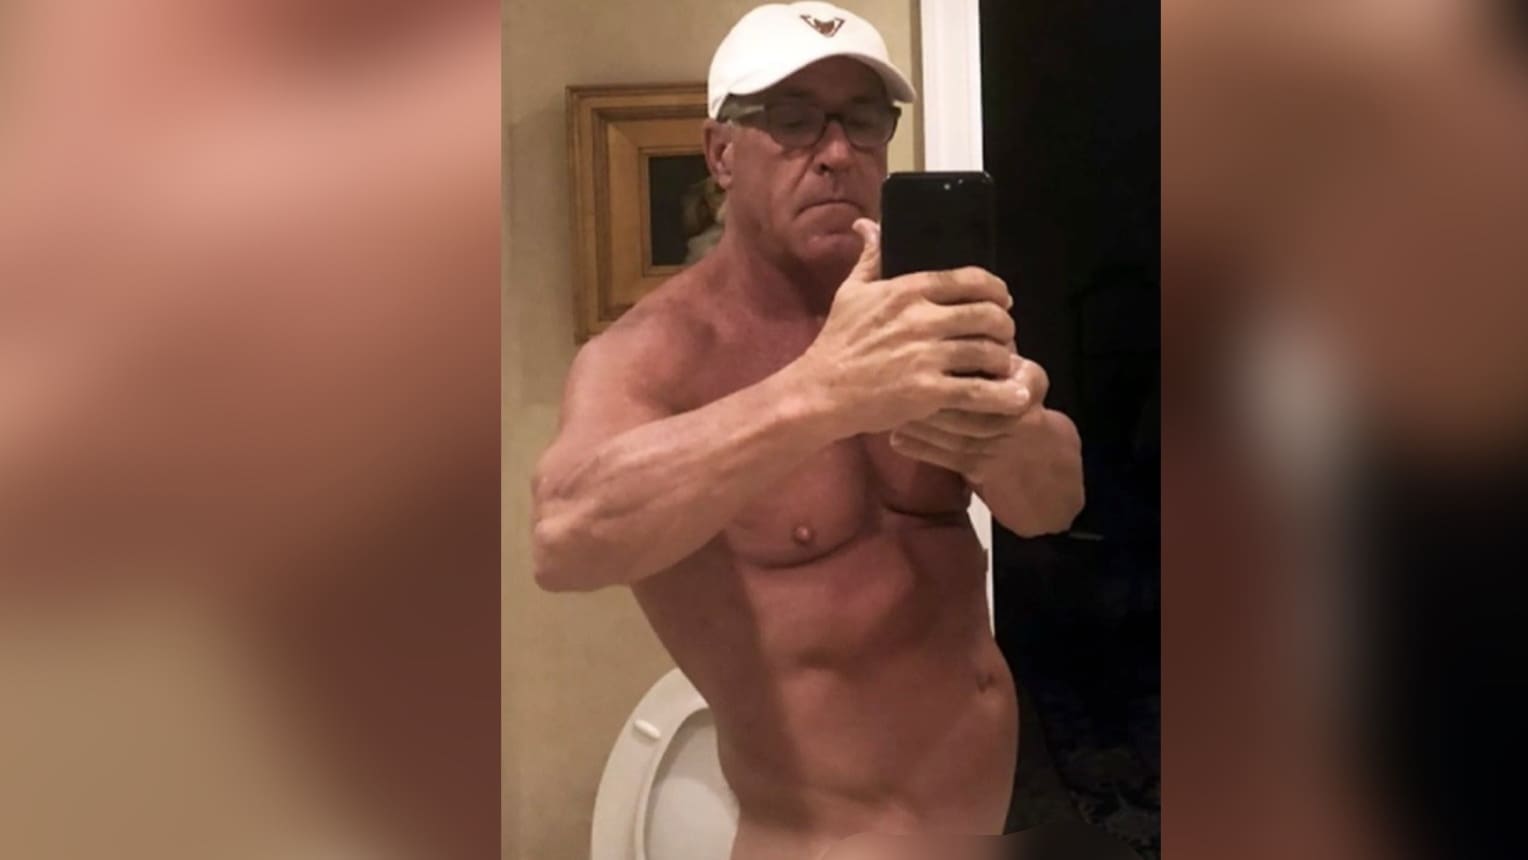 Naked Selfie of Joe Biden's Younger Brother Frank Biden in 2018 Wearing Only Cap and Glasses Surfaces on Gay Porn Website: “They Must Have Hacked my Phone” | The Gateway Pundit | by Jim Hᴏft